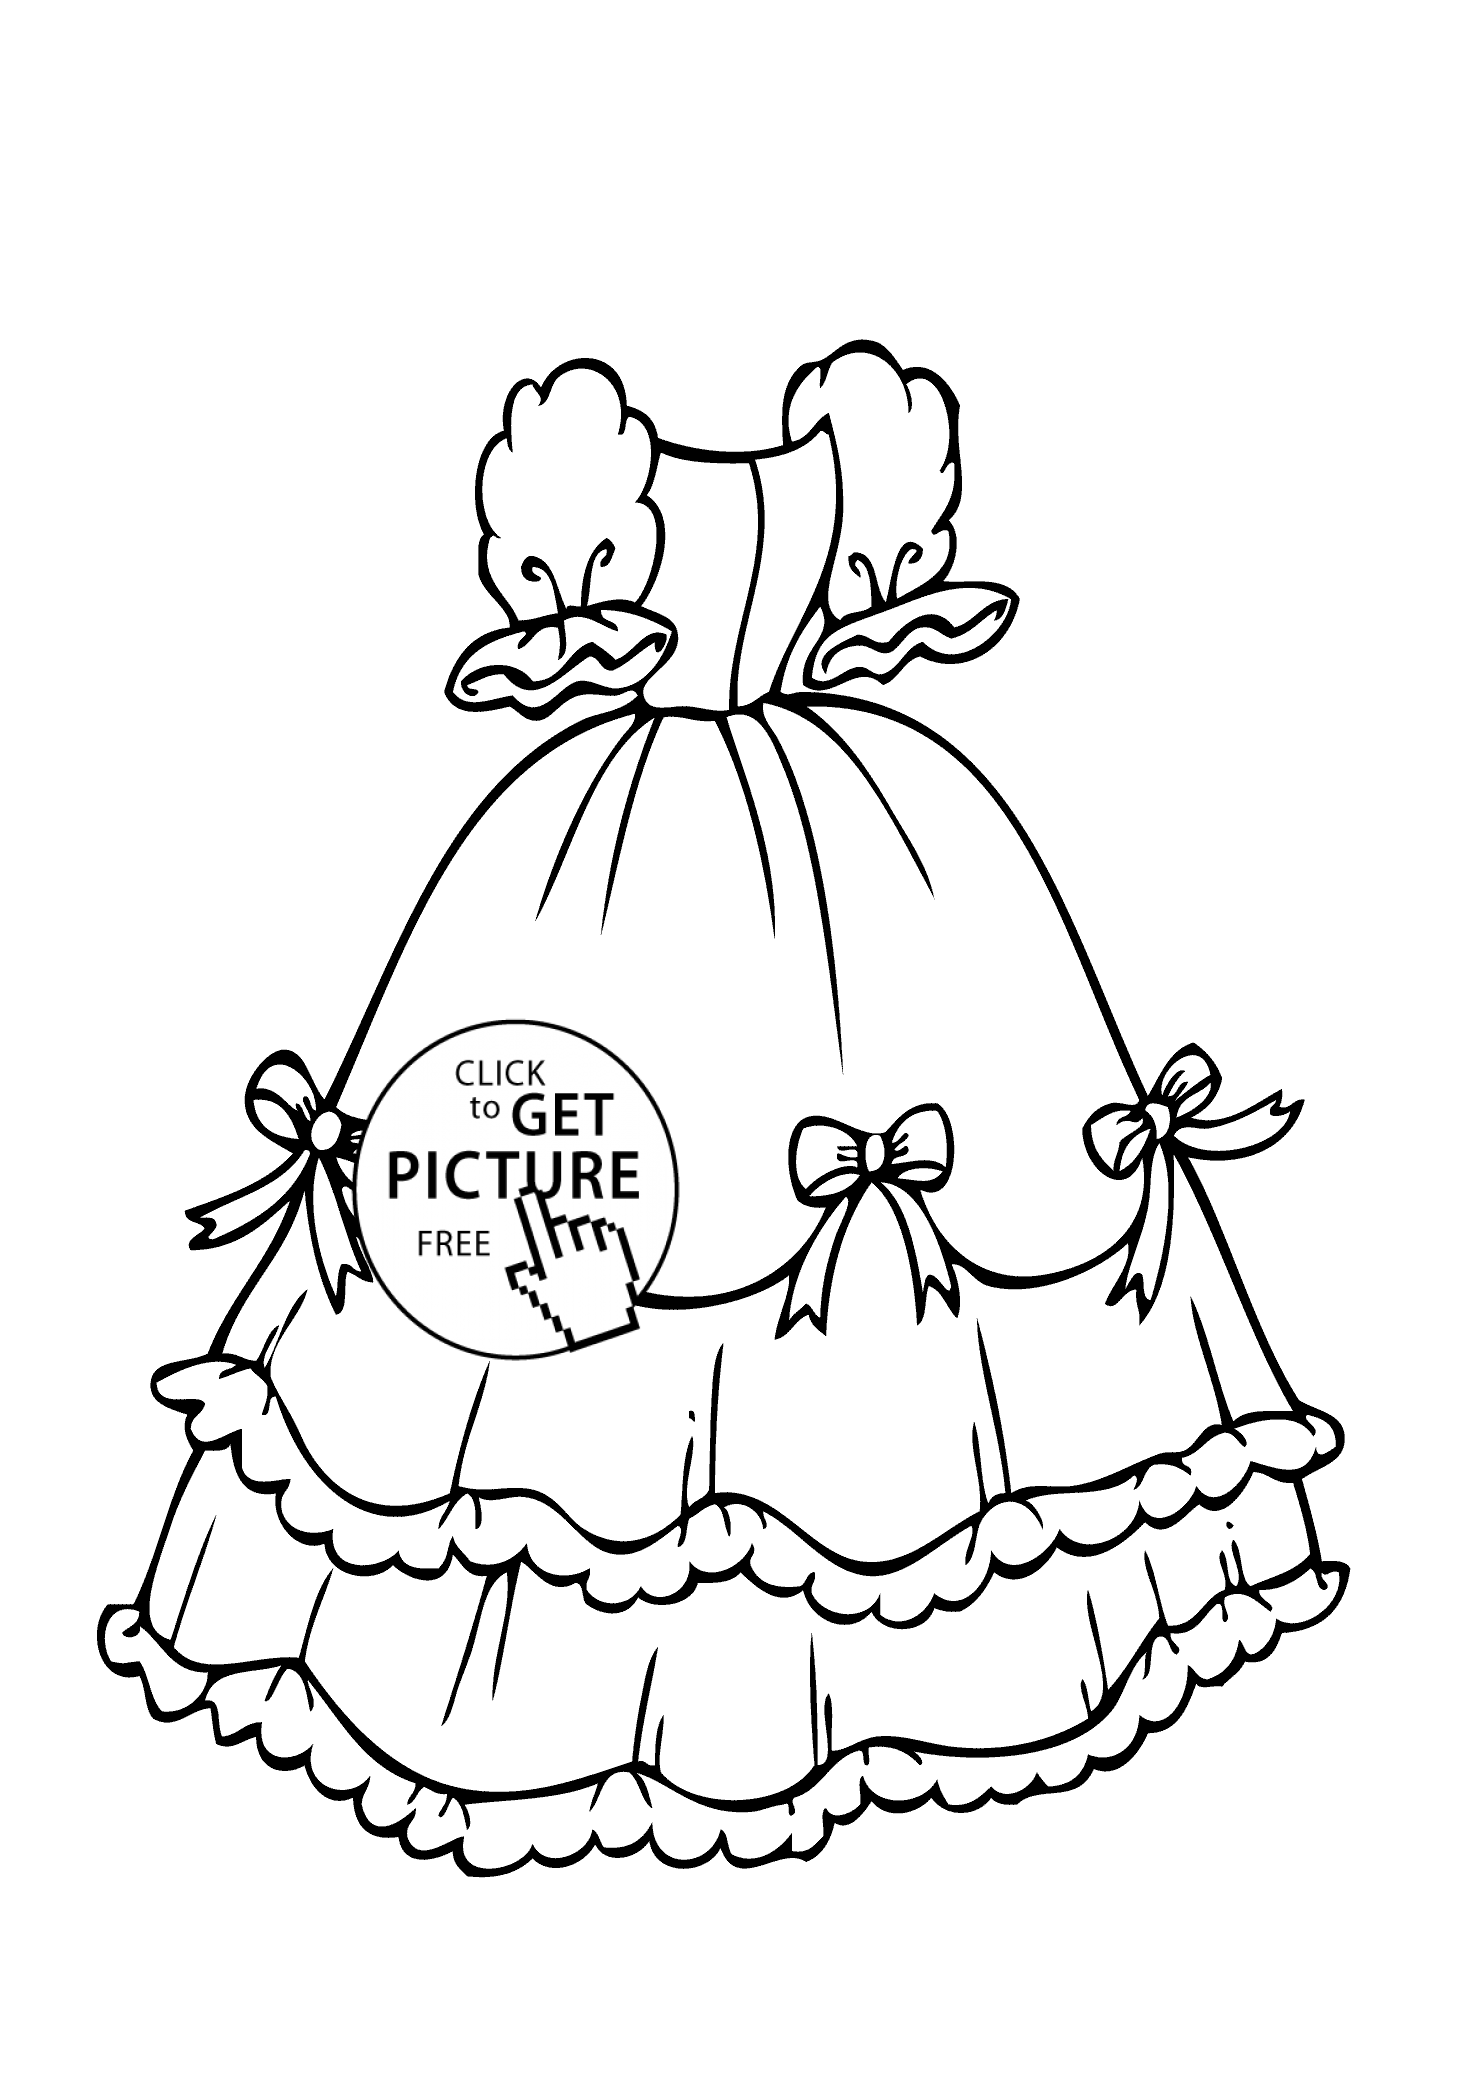 Coloring pages for girls free, printable and online